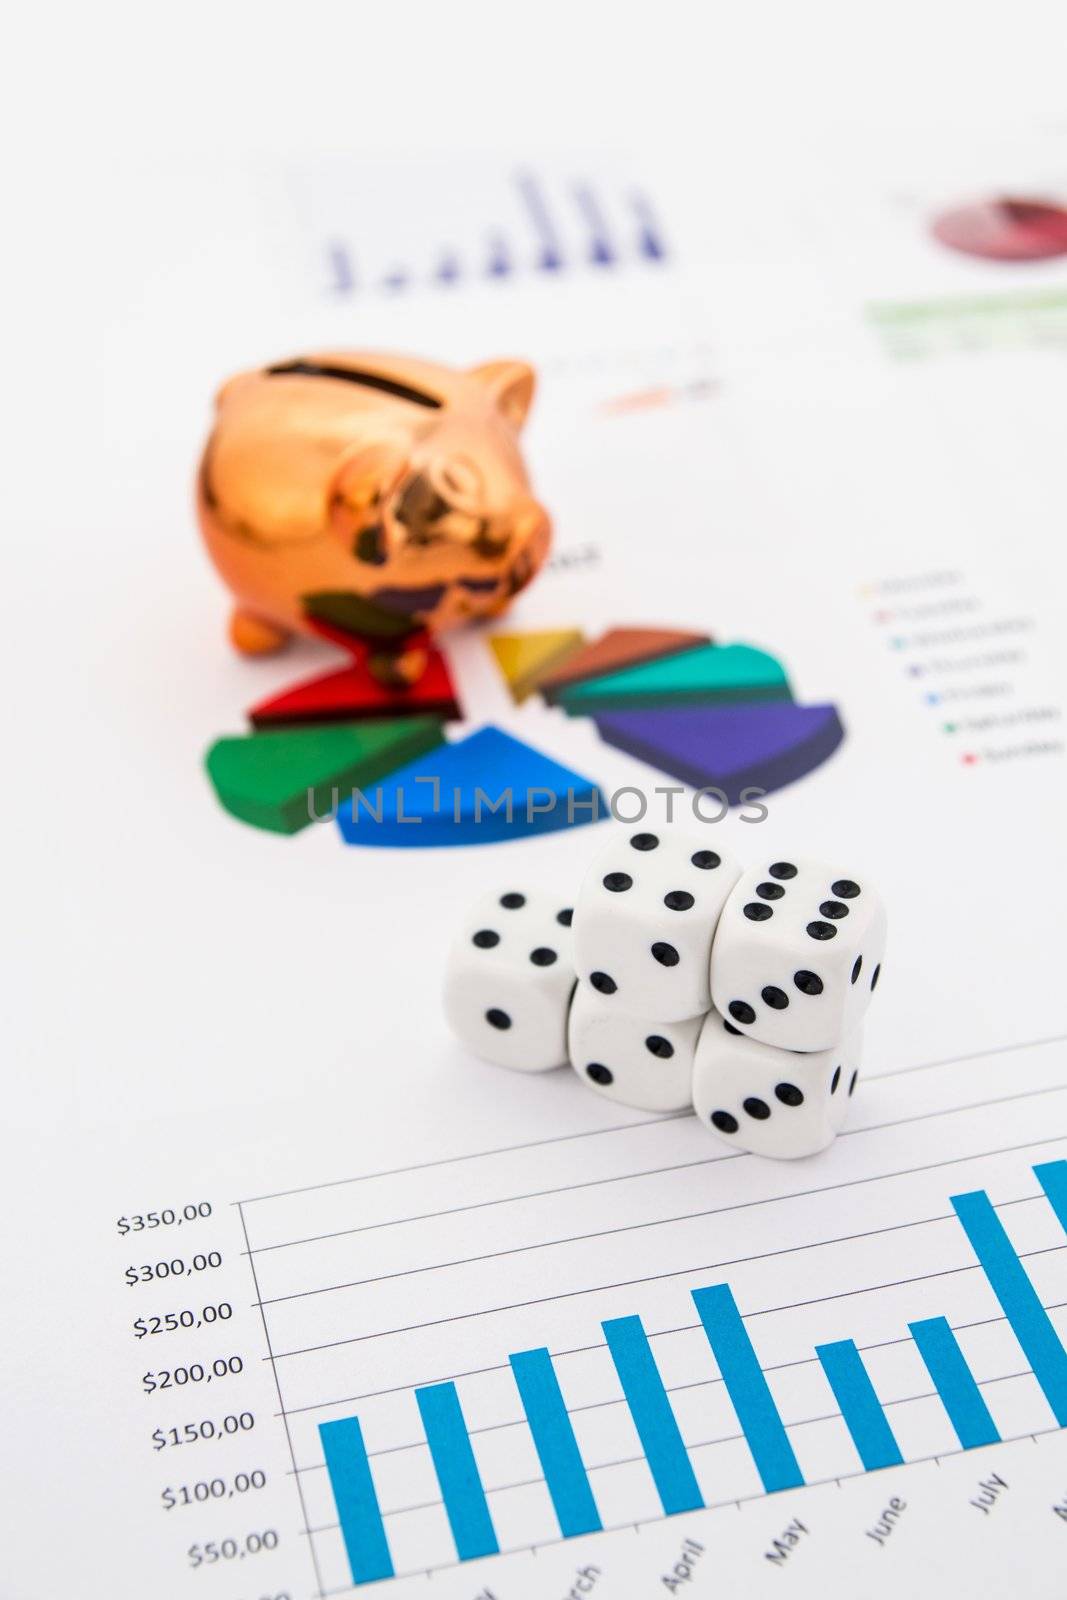 Saving money. Gambling concept.Pig, coins and dices composition